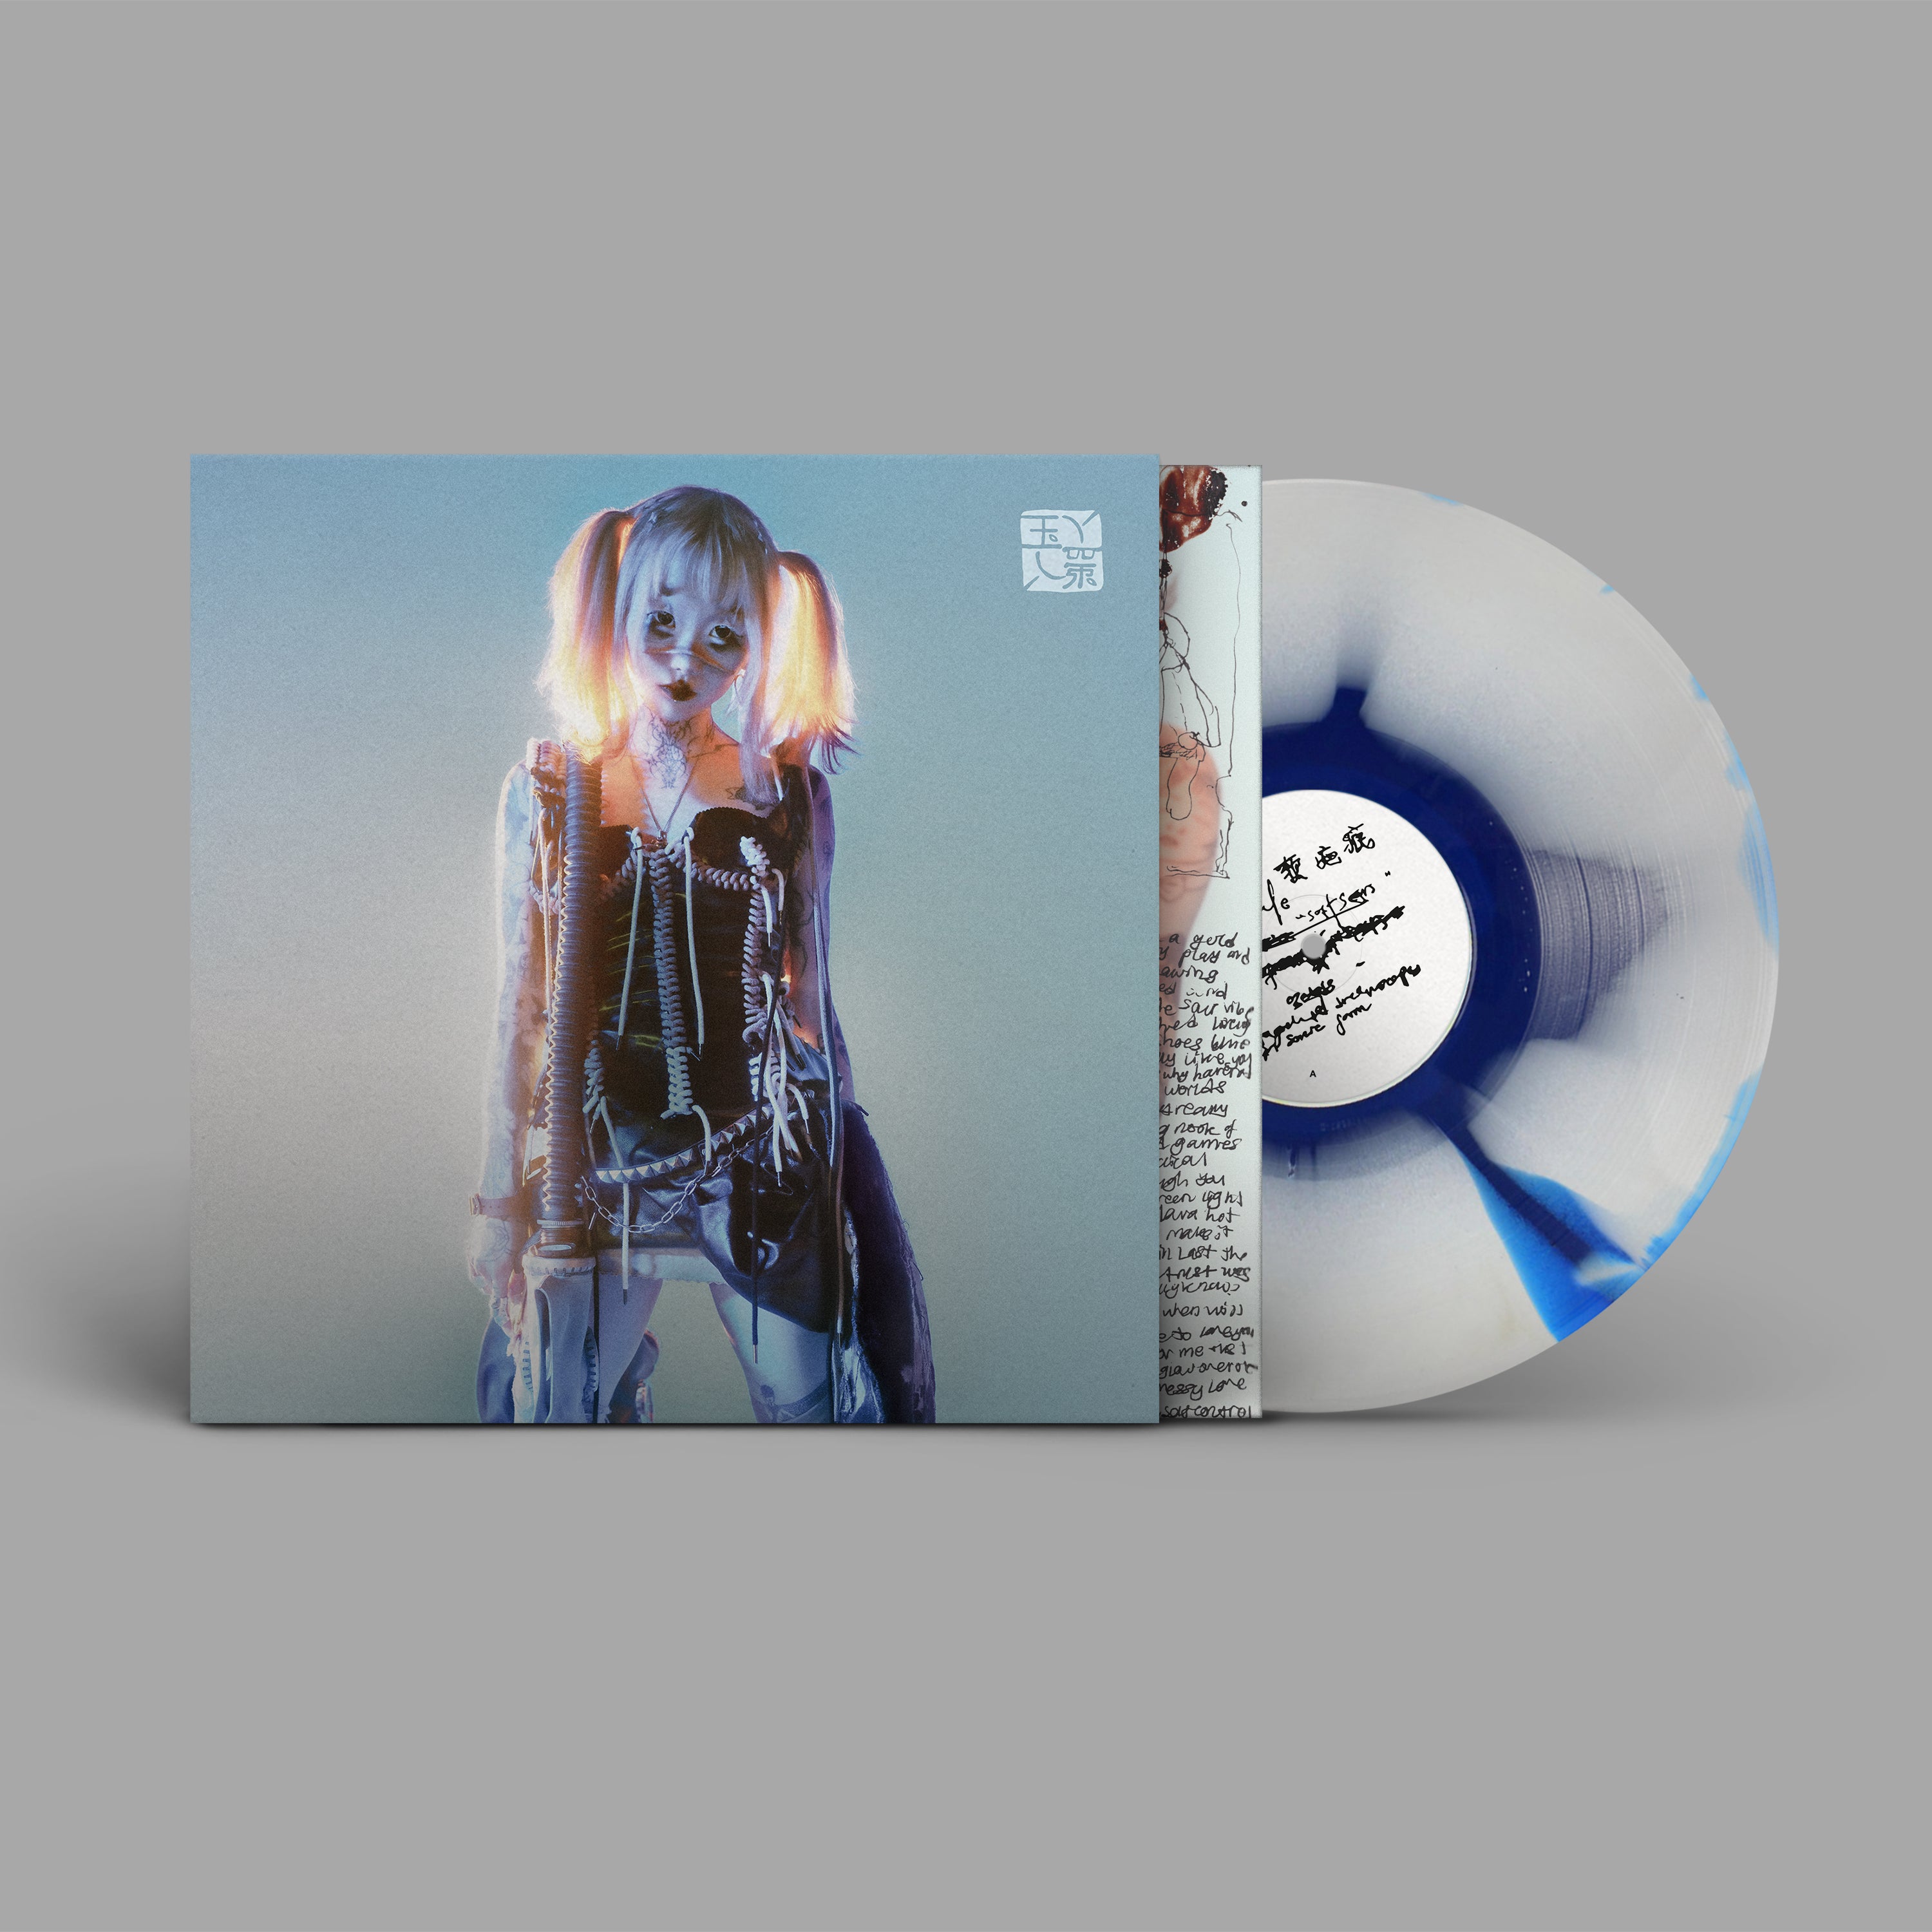 yeule - Softscars: Limited White + Blue “Ink Spill” Vinyl LP